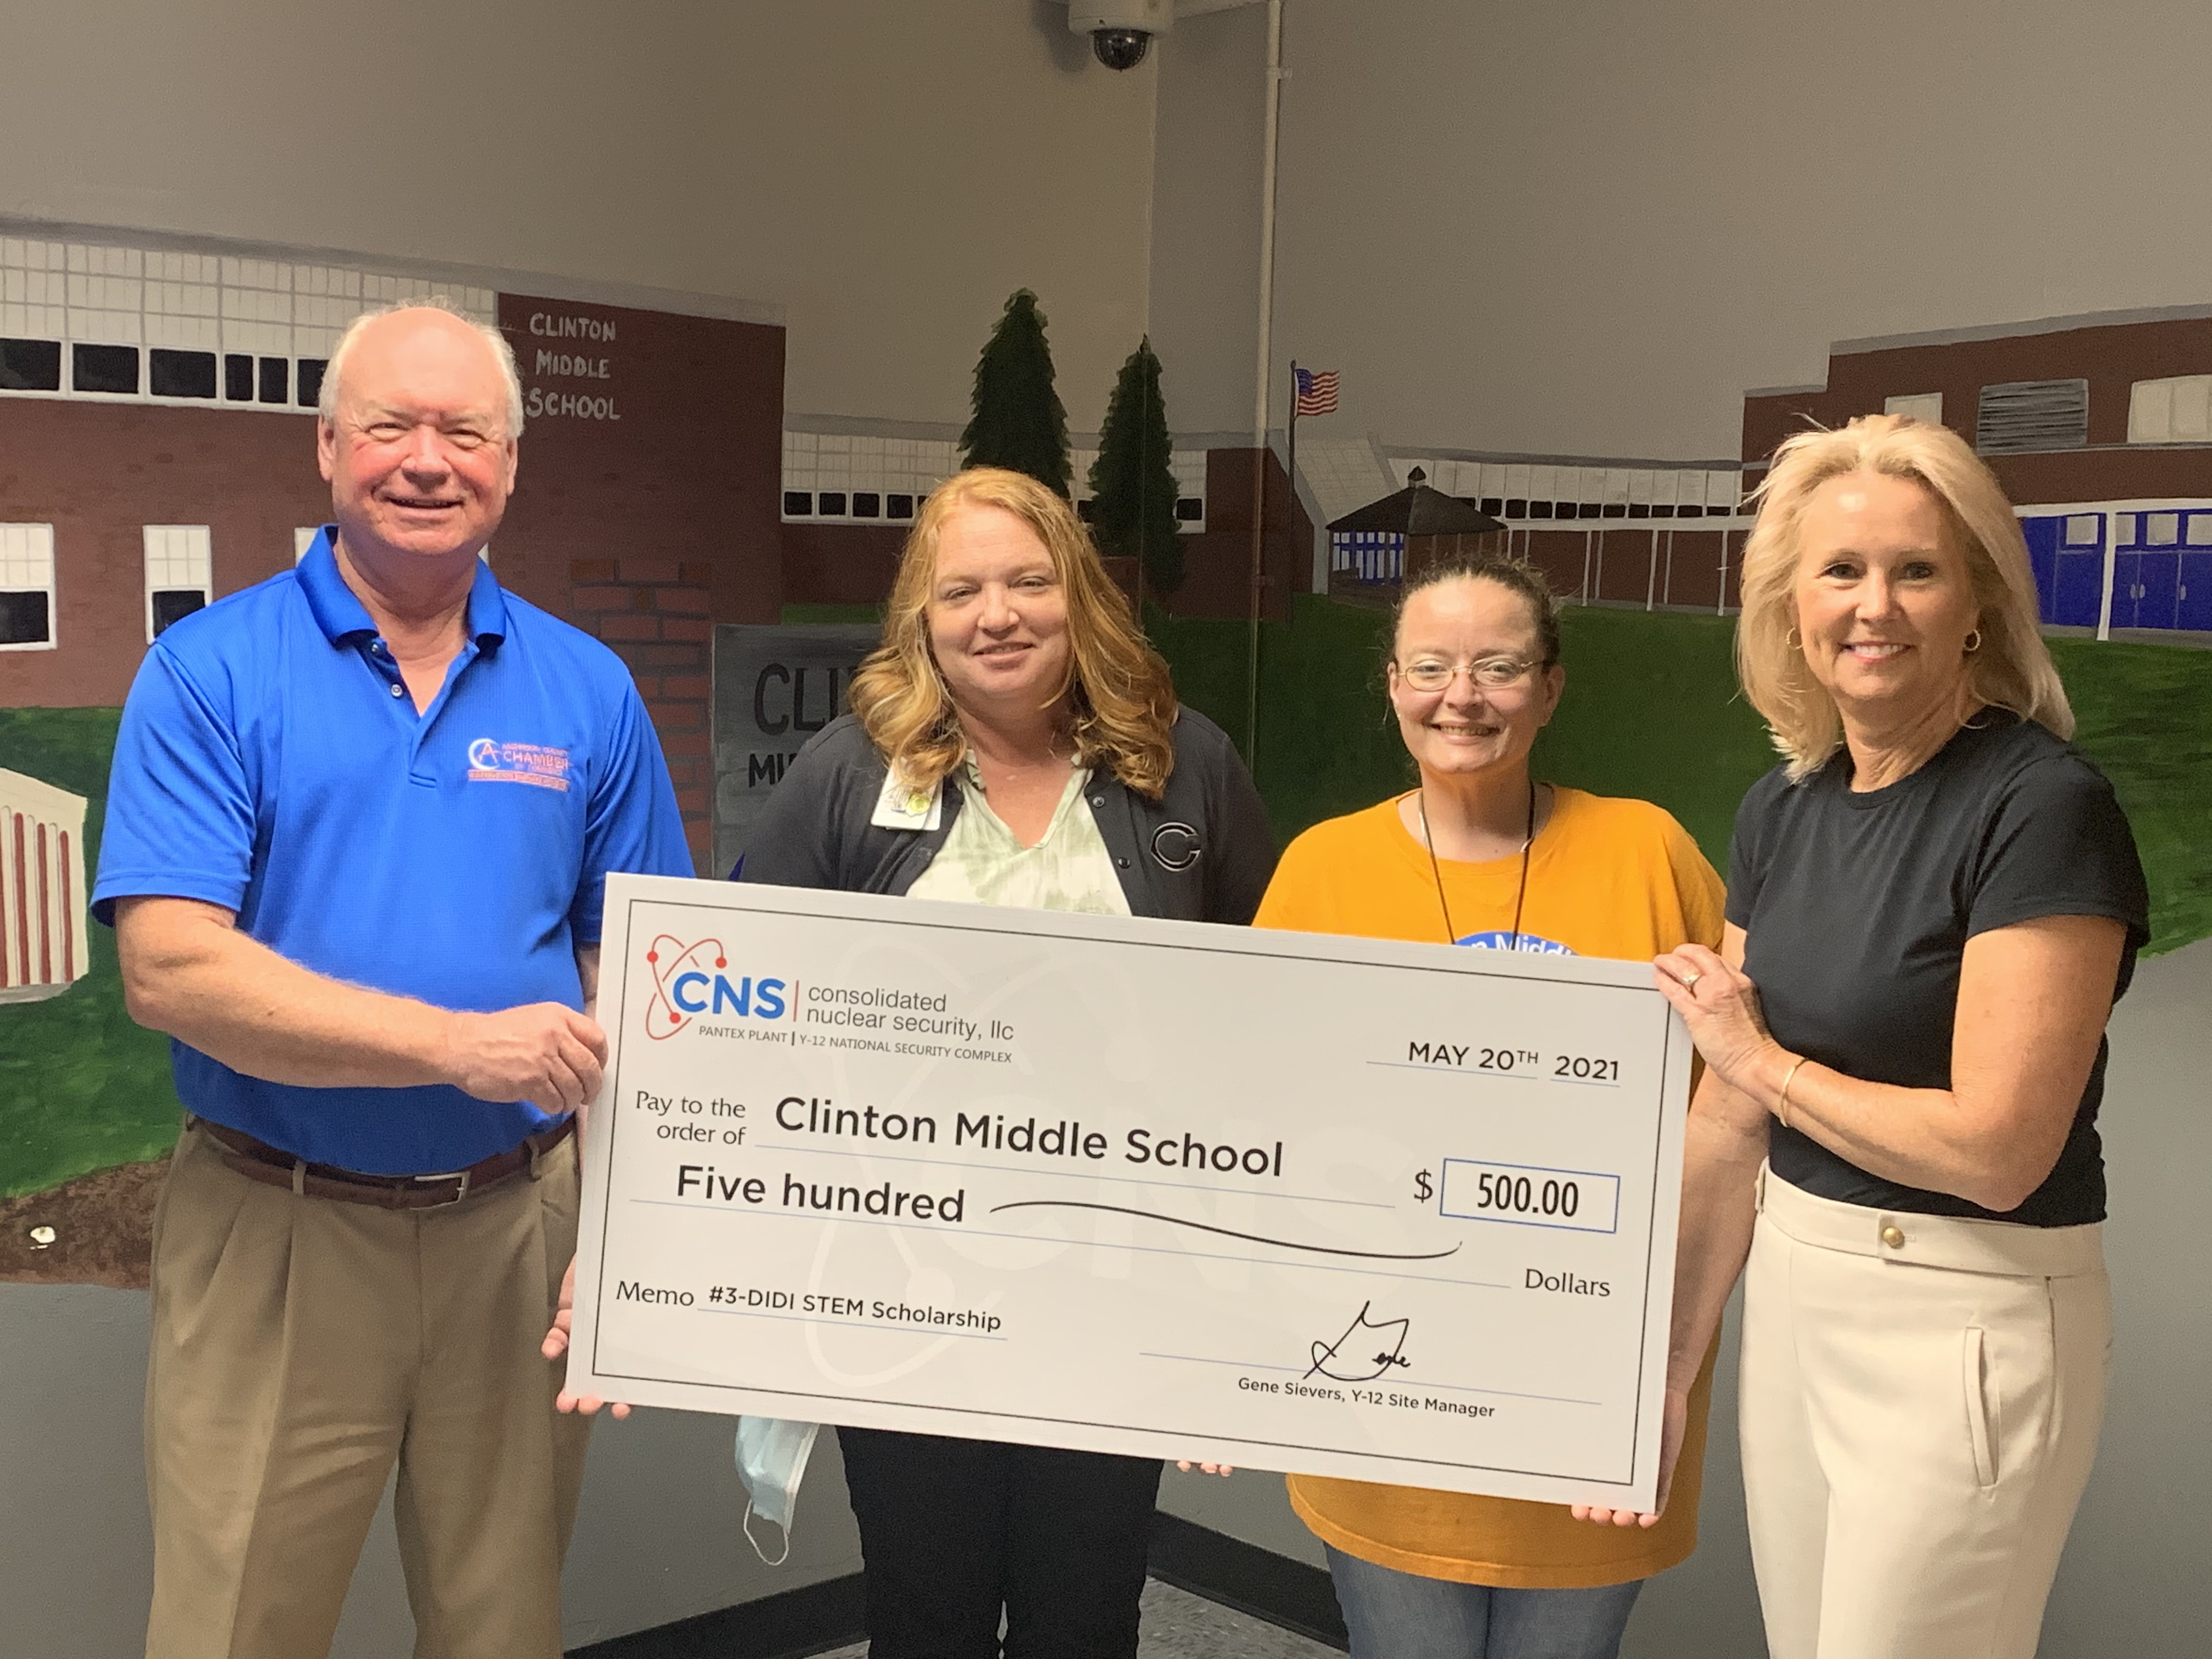 Clinton Middle School received a $500 scholarship from CNS for their third place